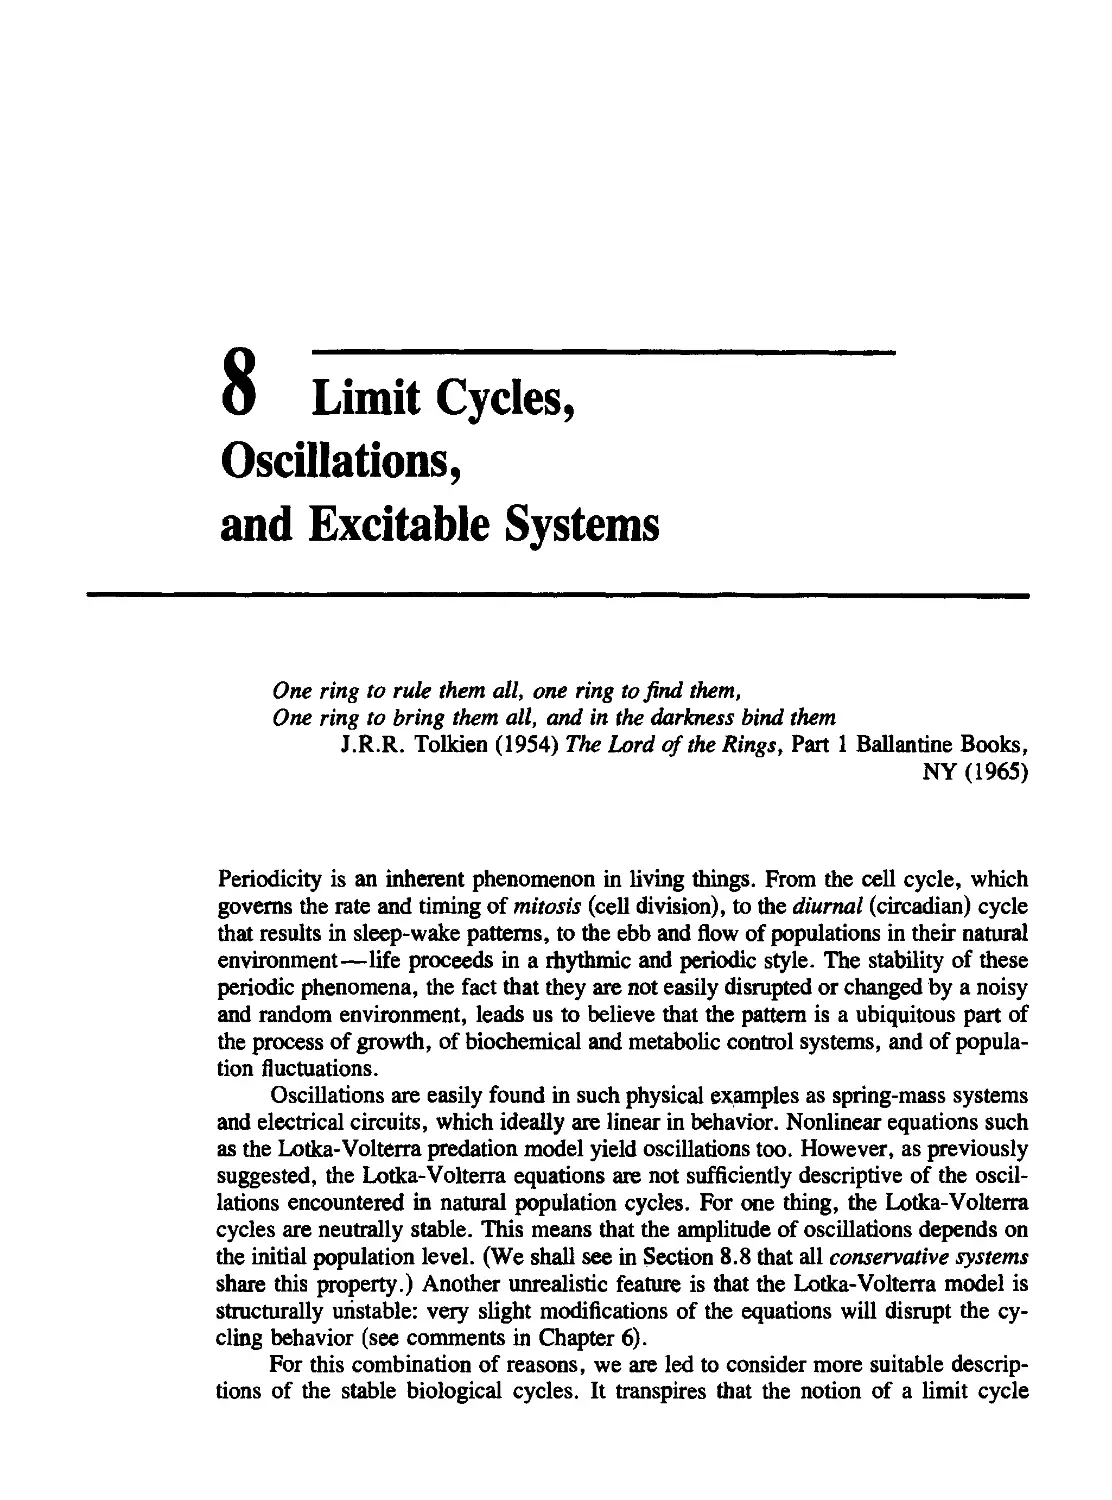 Chapter 8 Limit Cycles, Oscillations, and Excitable Systems